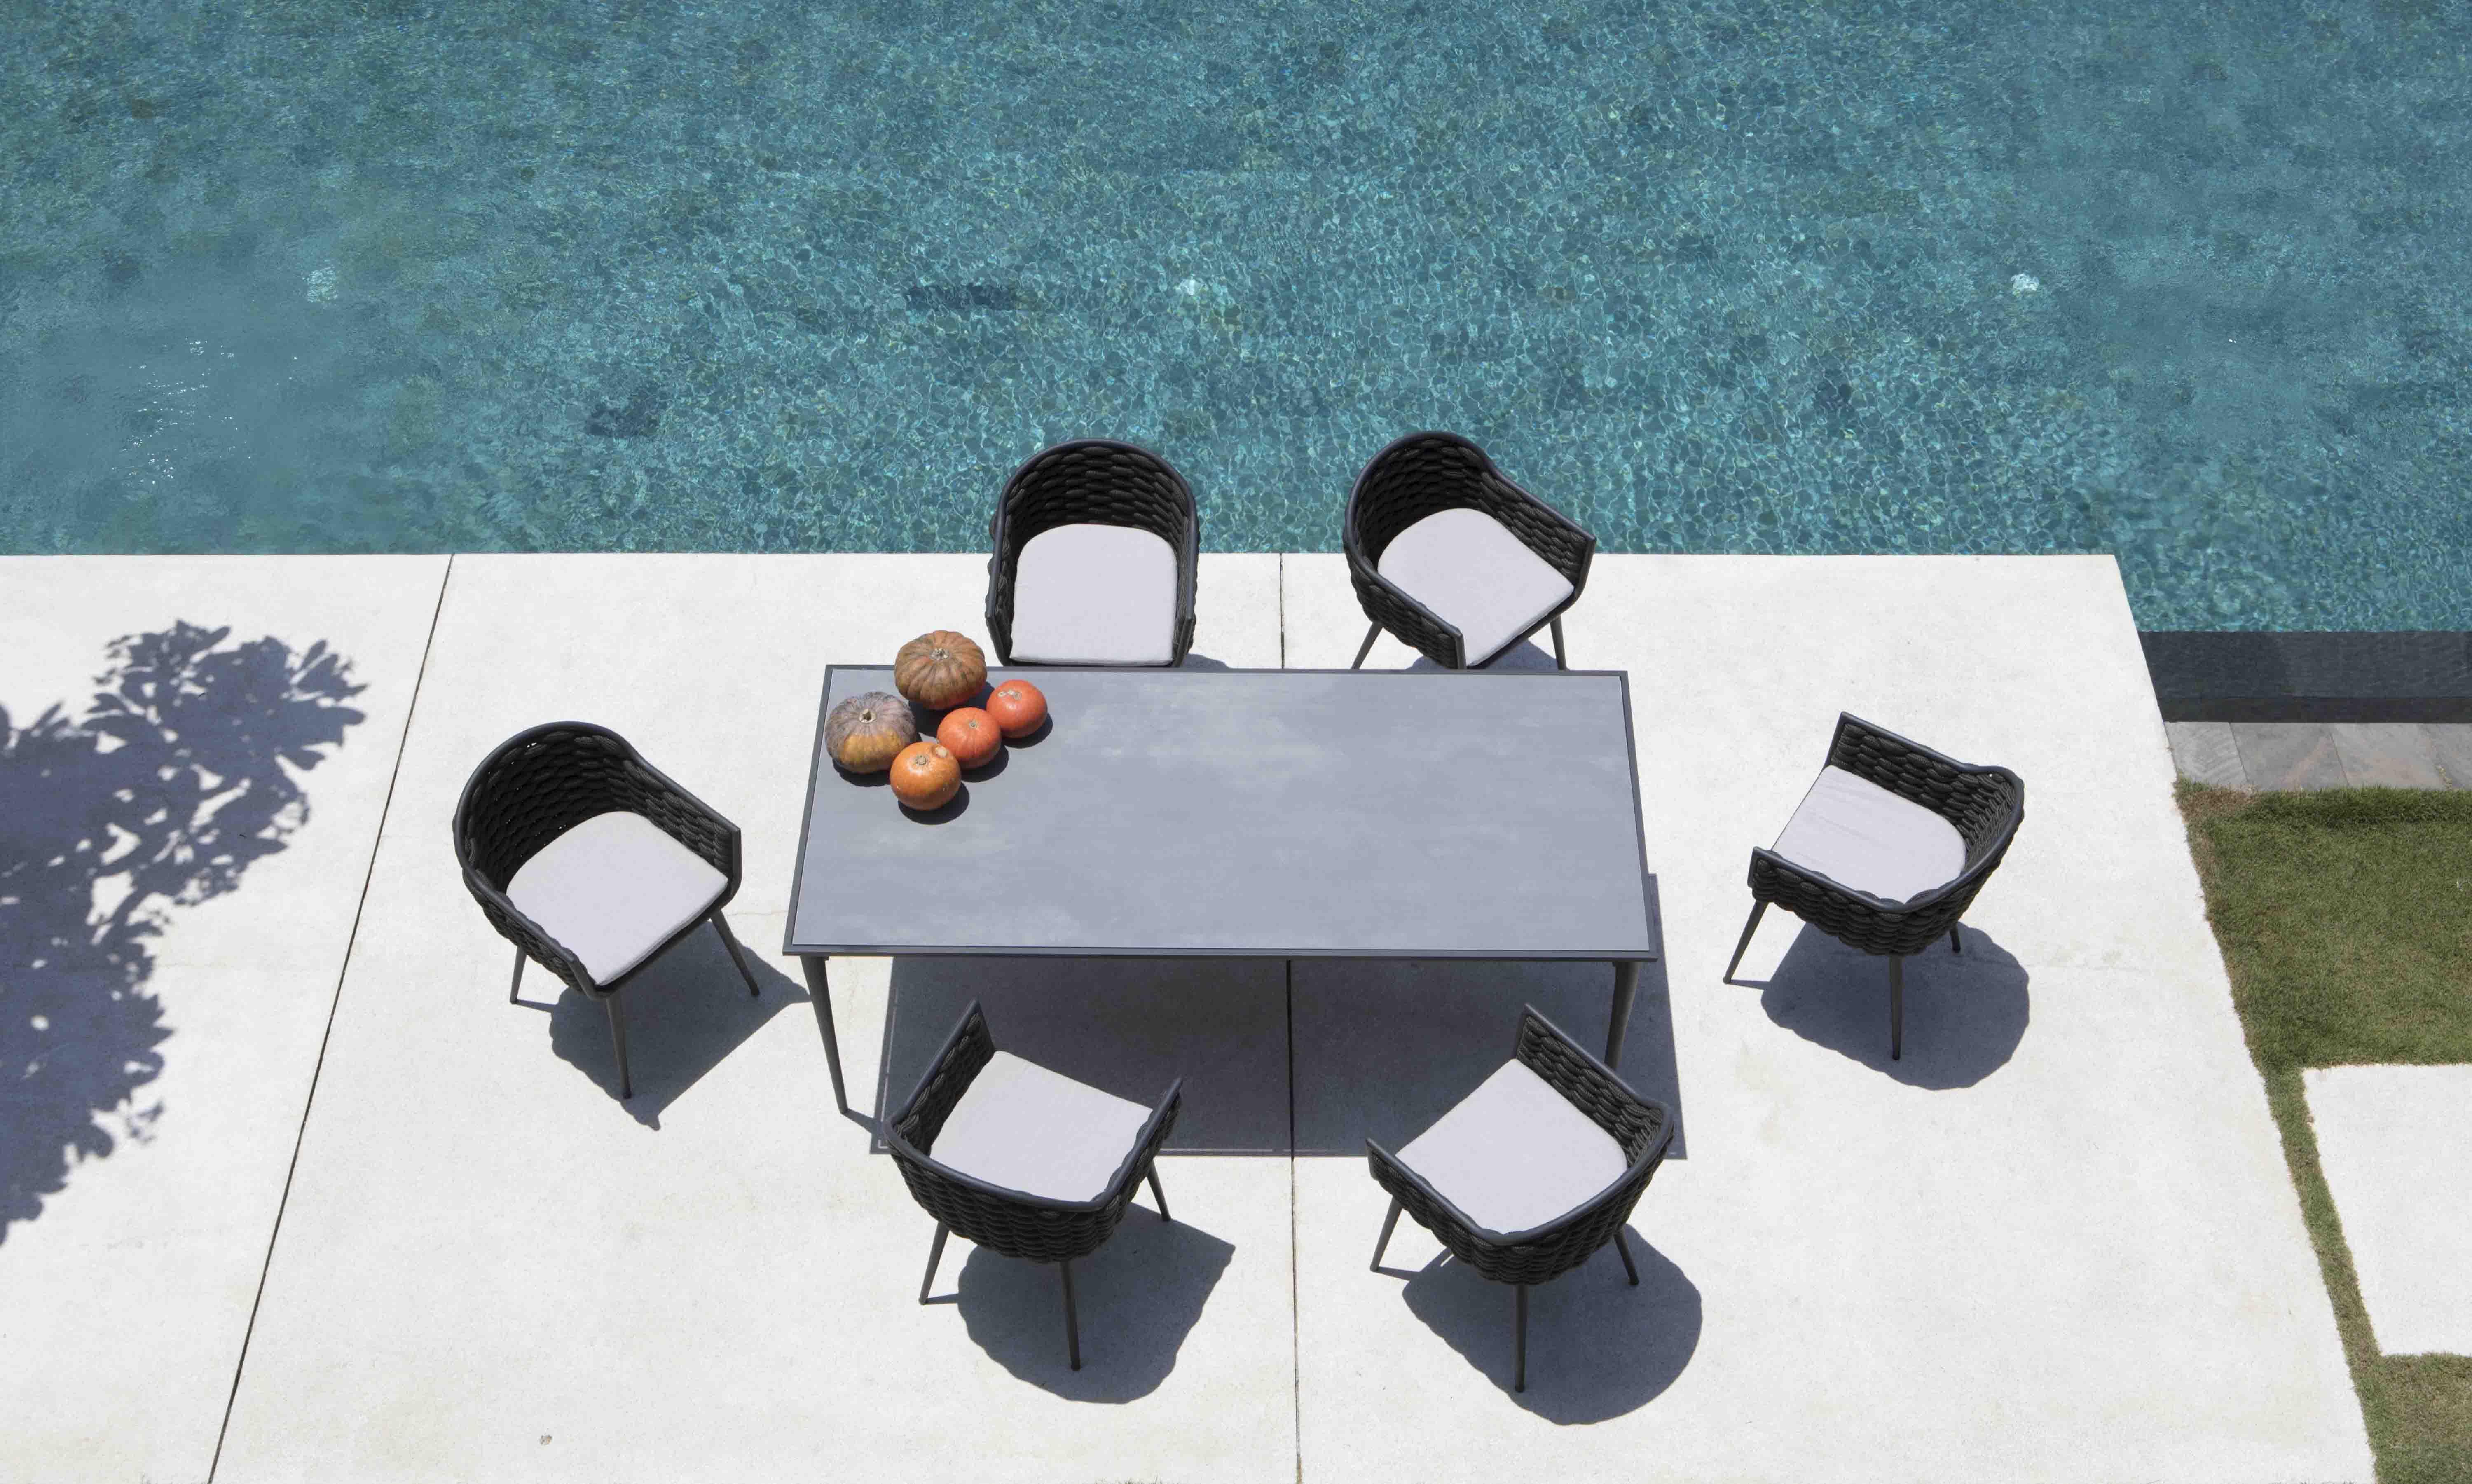 Serpent 6 Seat Dining Table By Skyline, Skyline Design Outdoor Furniture Uk